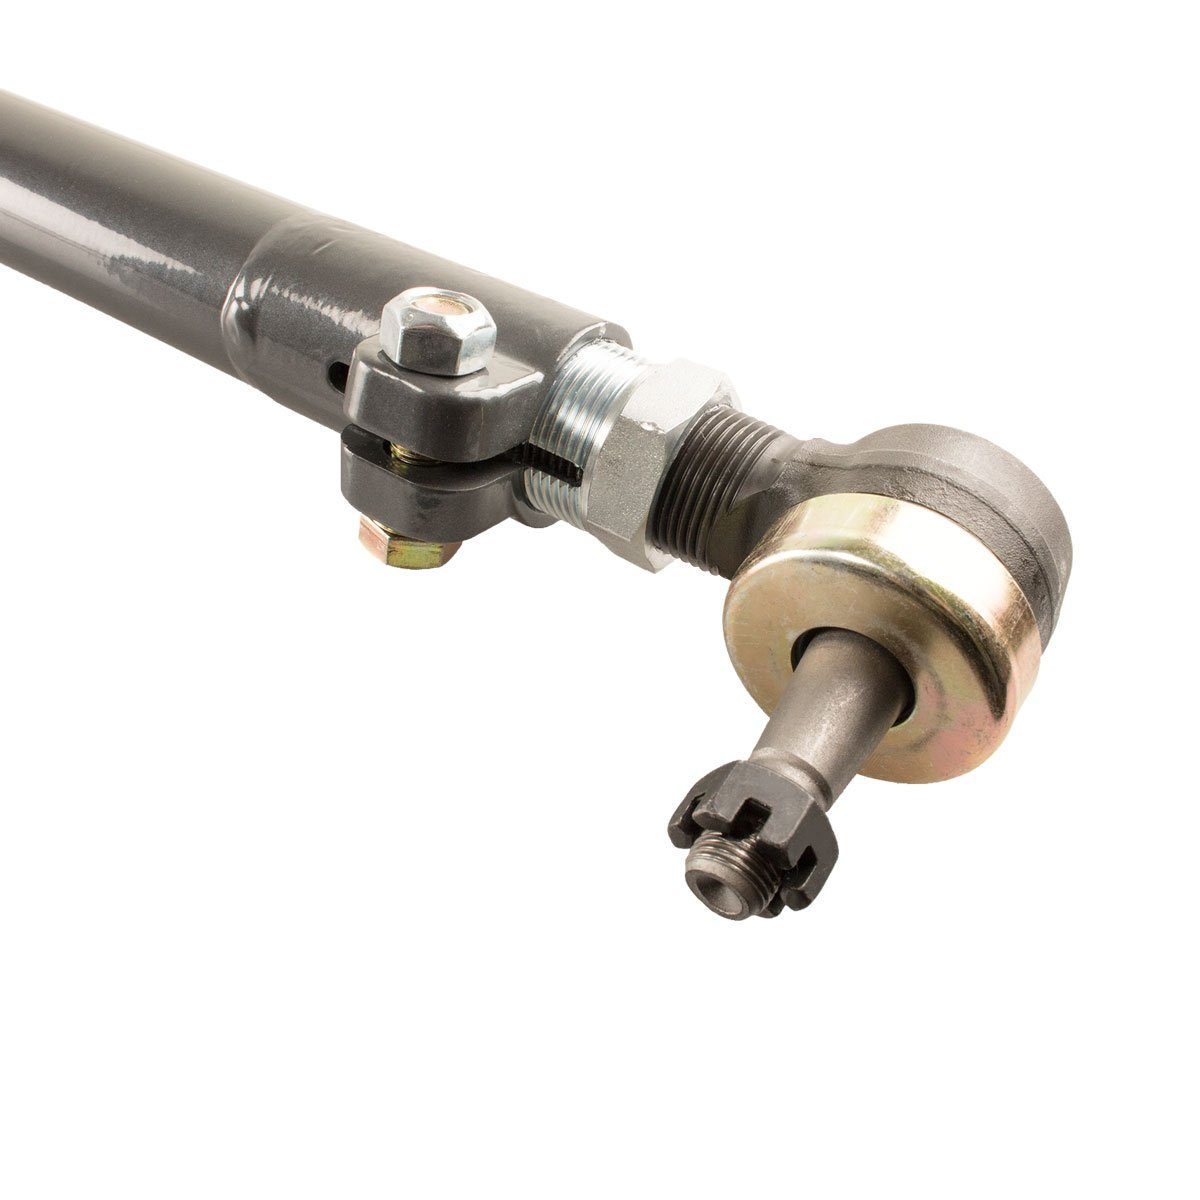 '13-23 Dodge Ram 2500/3500 Heavy Duty Tie Rod Suspension Synergy Manufacturing close-up